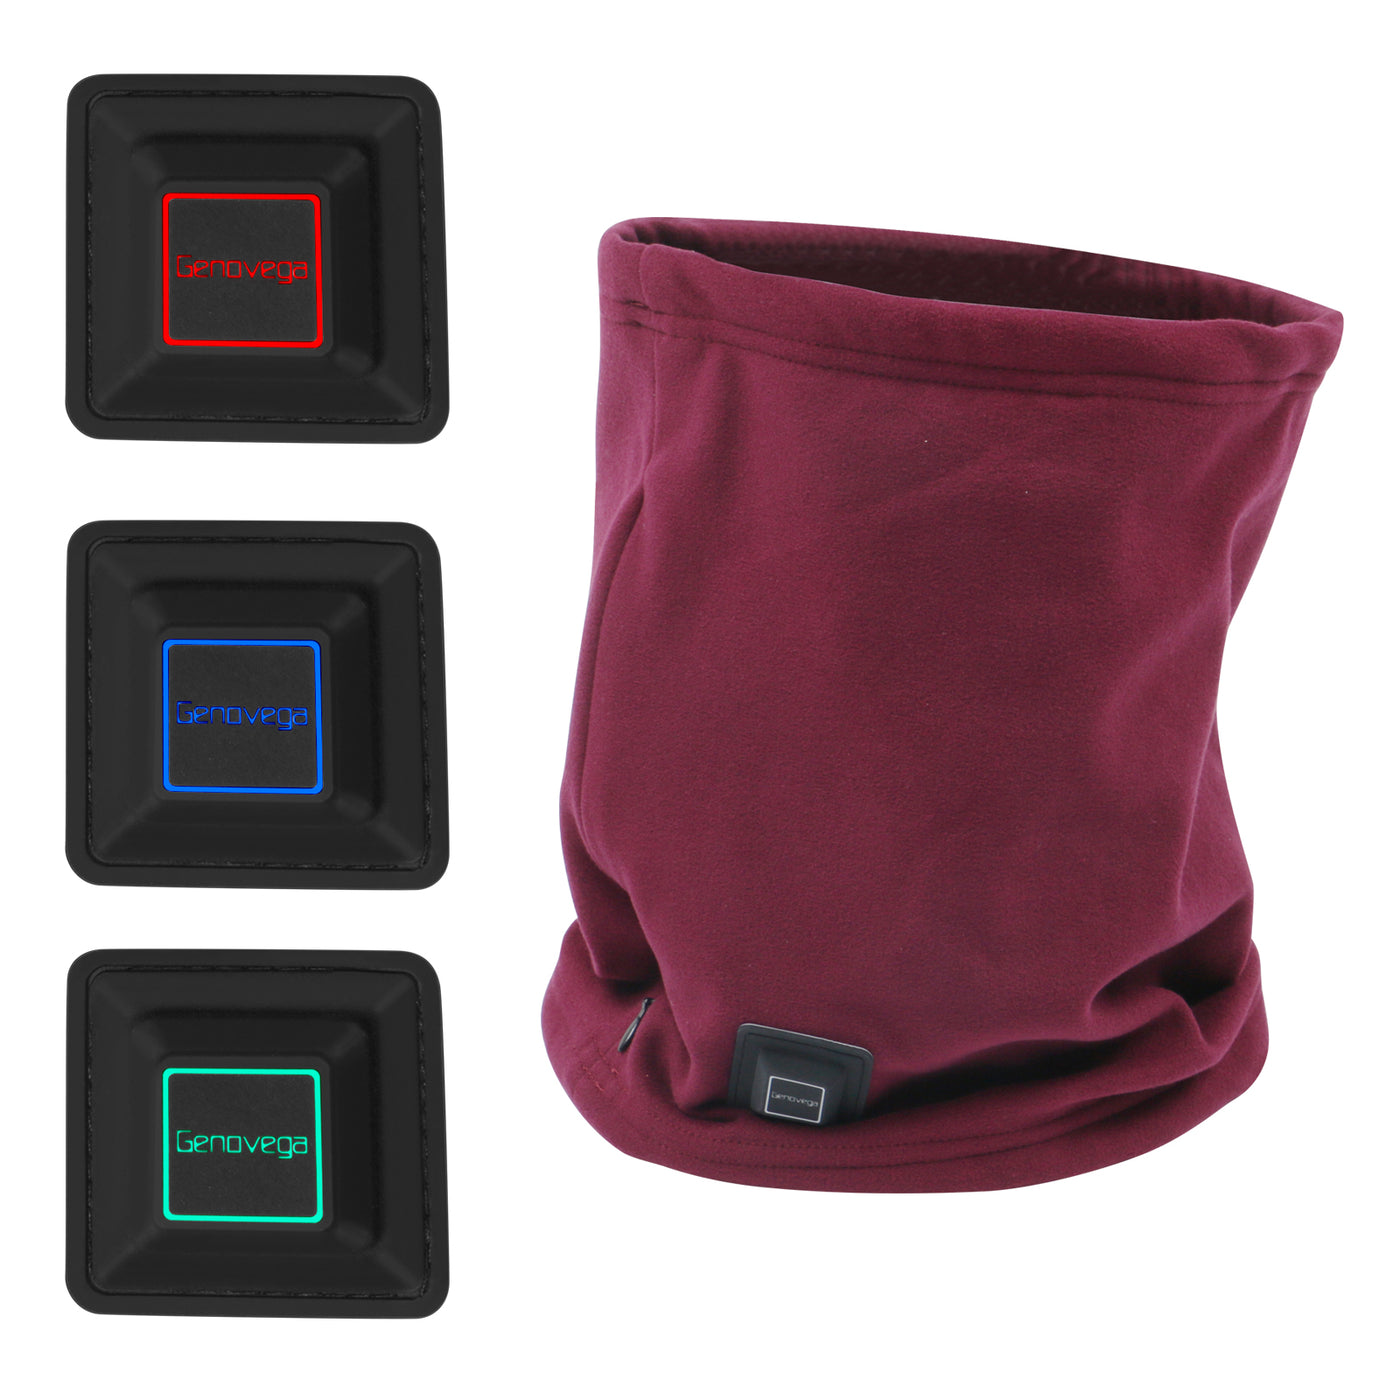 USB Heated Neck Gaiter Fleece Warmer Wrap Scarf with Adjustable 3 Levels Switch